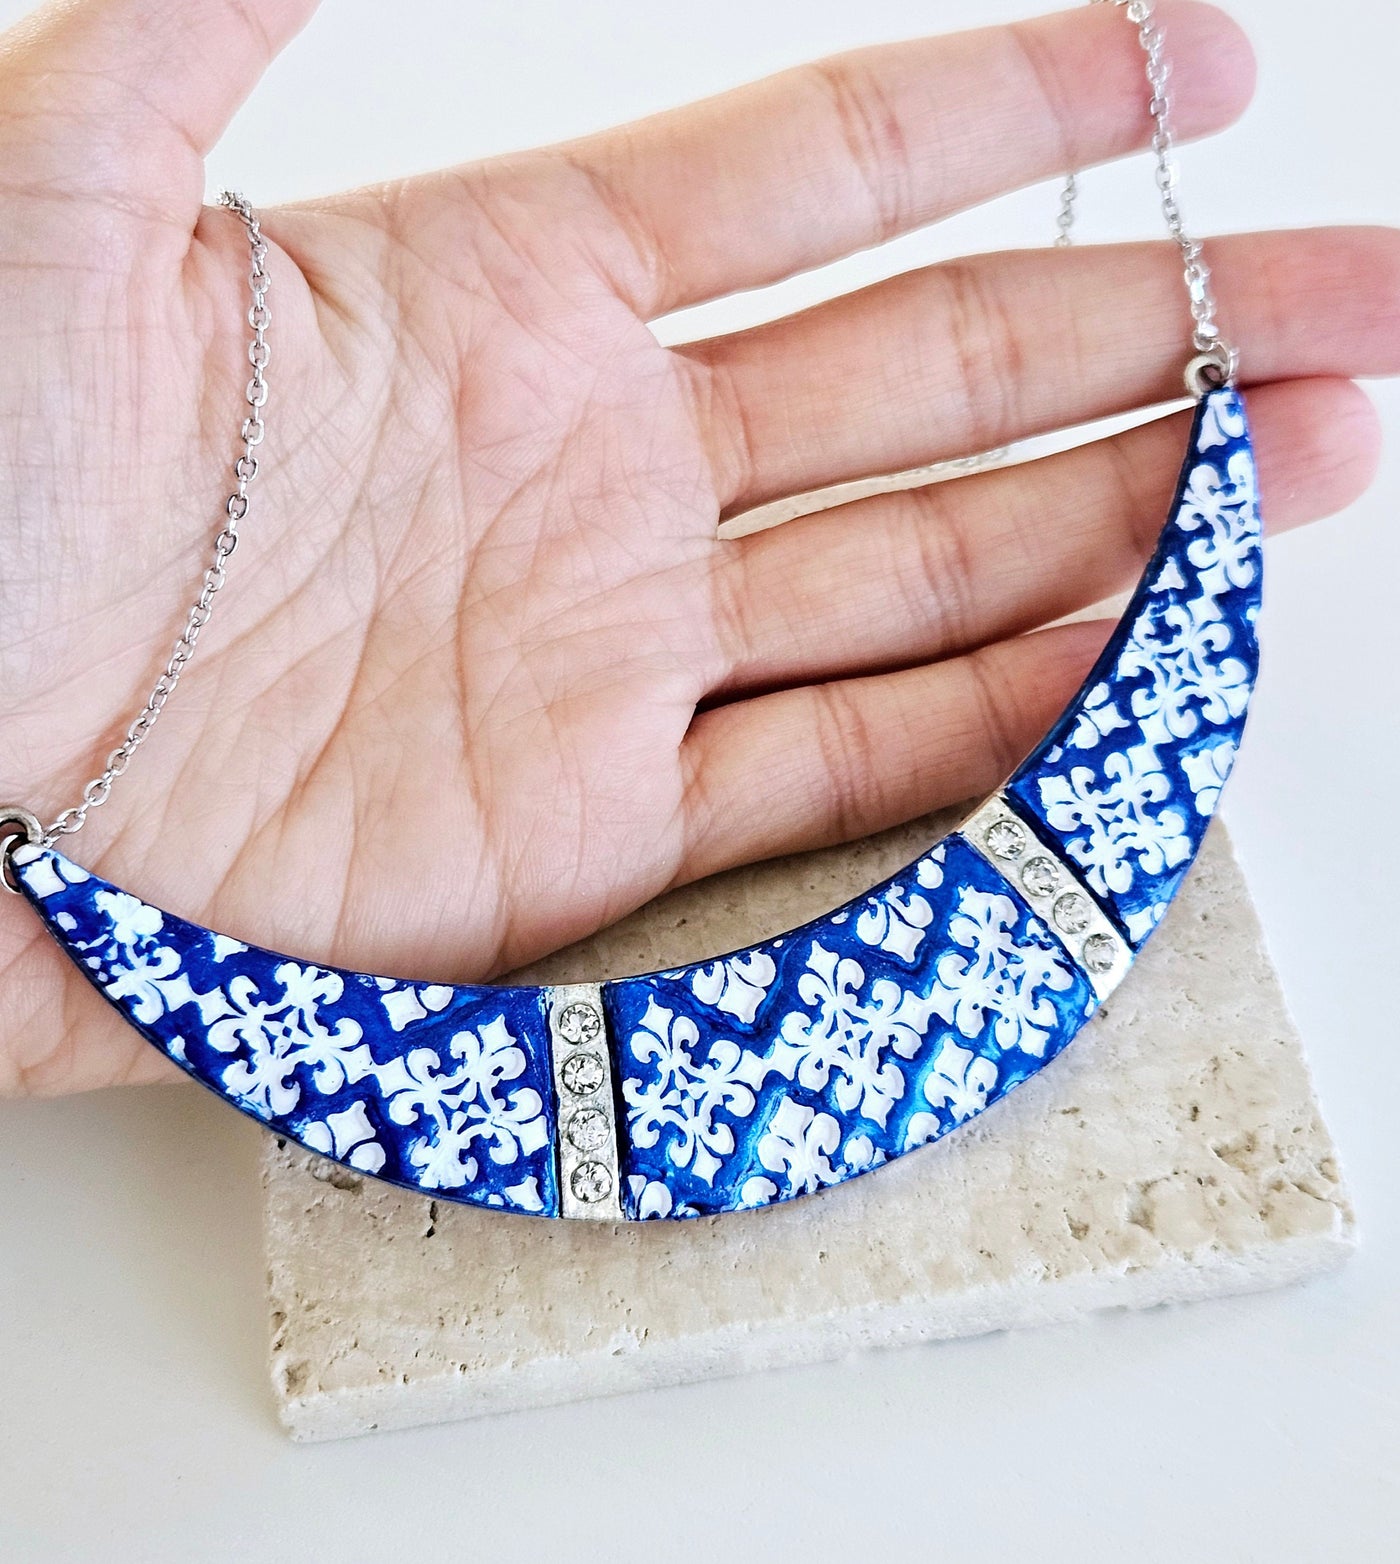 BLUE Portugal Antique Tile SILVER Choker Azulejo Necklace Ceramic Clay Tile Pendant Handmade Jewelry Pottery Tile Necklace Woman Gift